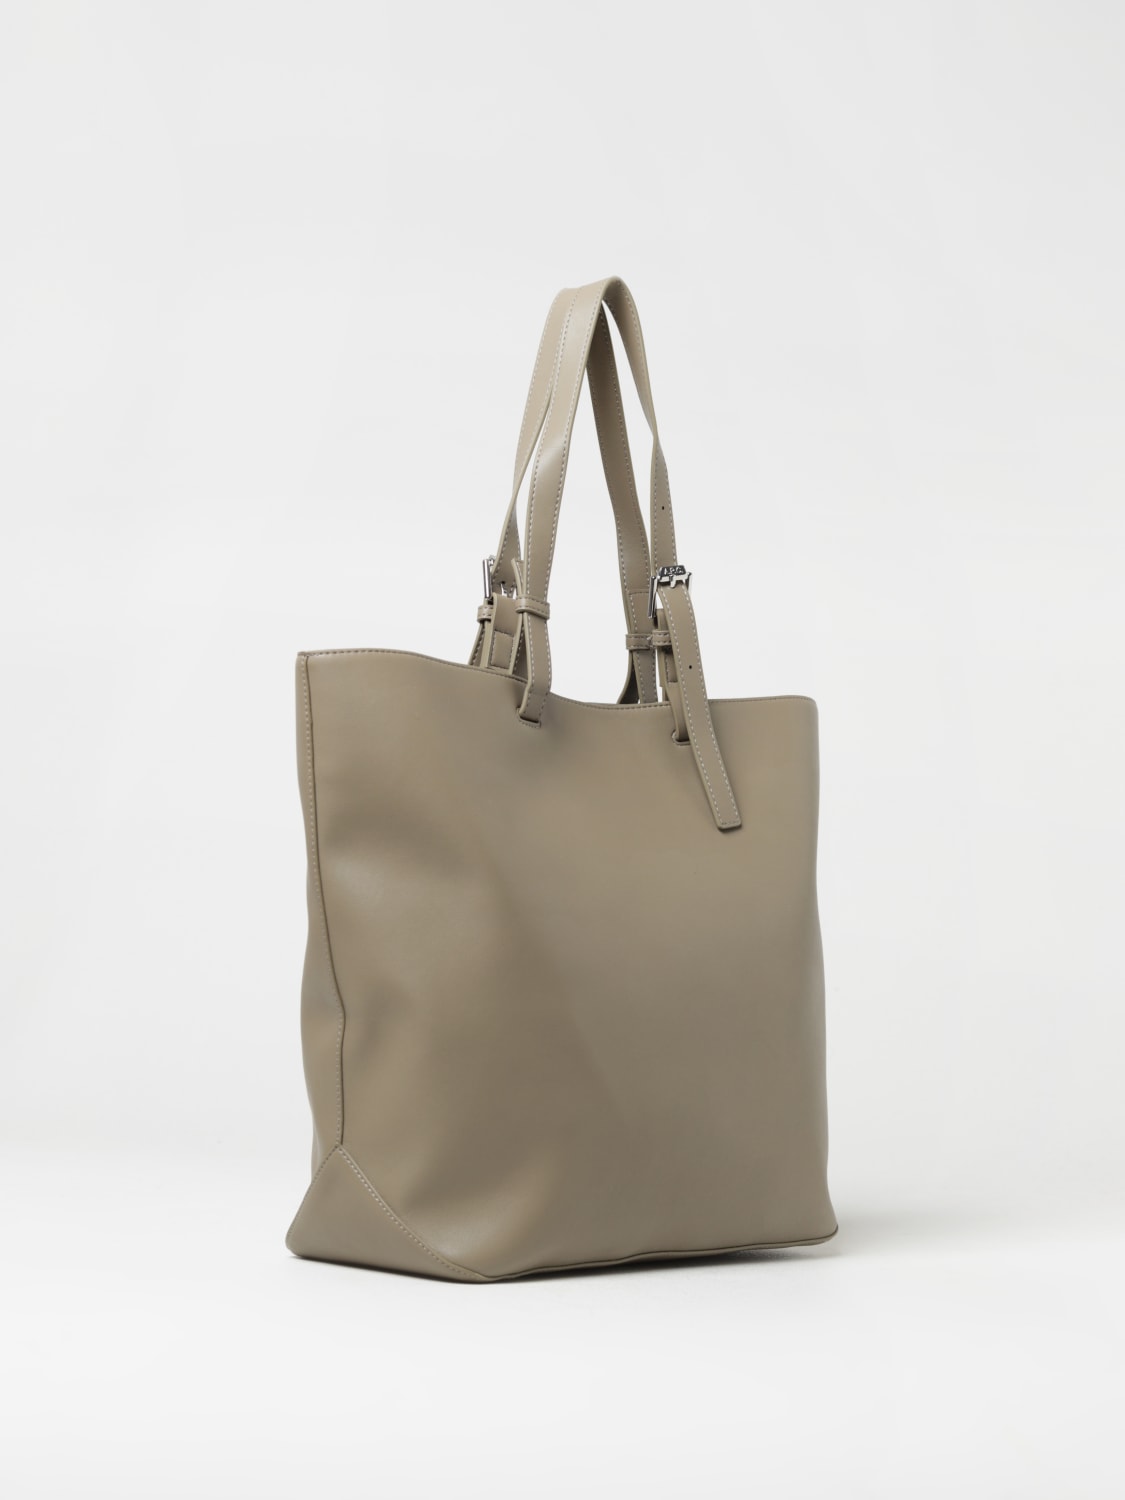 A.P.C.: bags for man - Green  A.p.c. bags PUAATM61565 online at